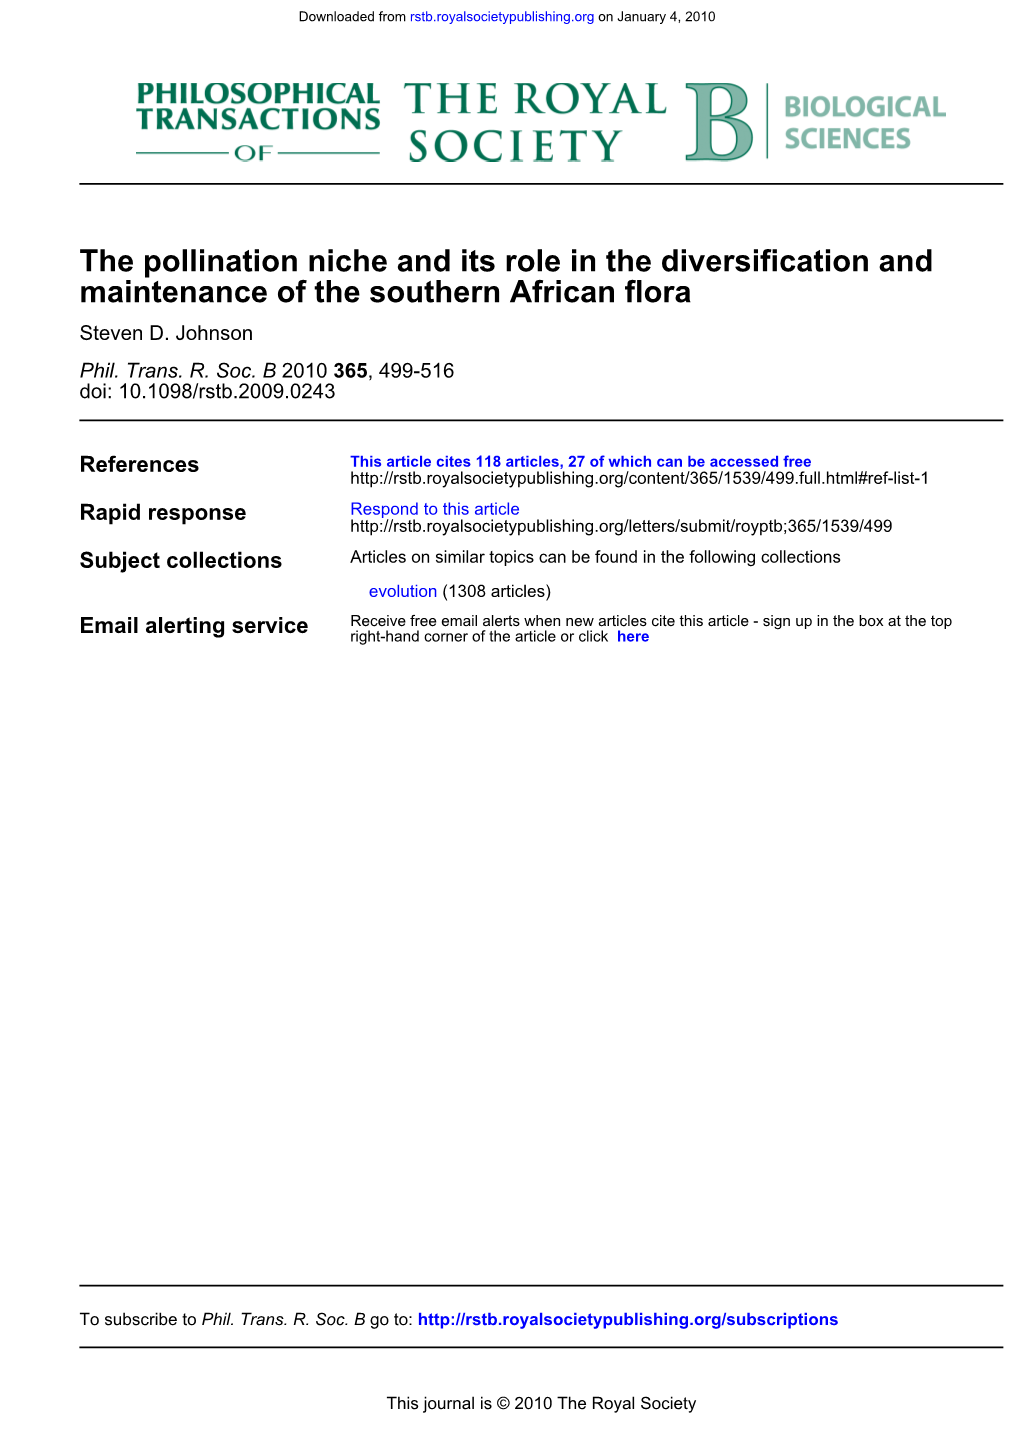 Maintenance of the Southern African Flora the Pollination Niche and Its